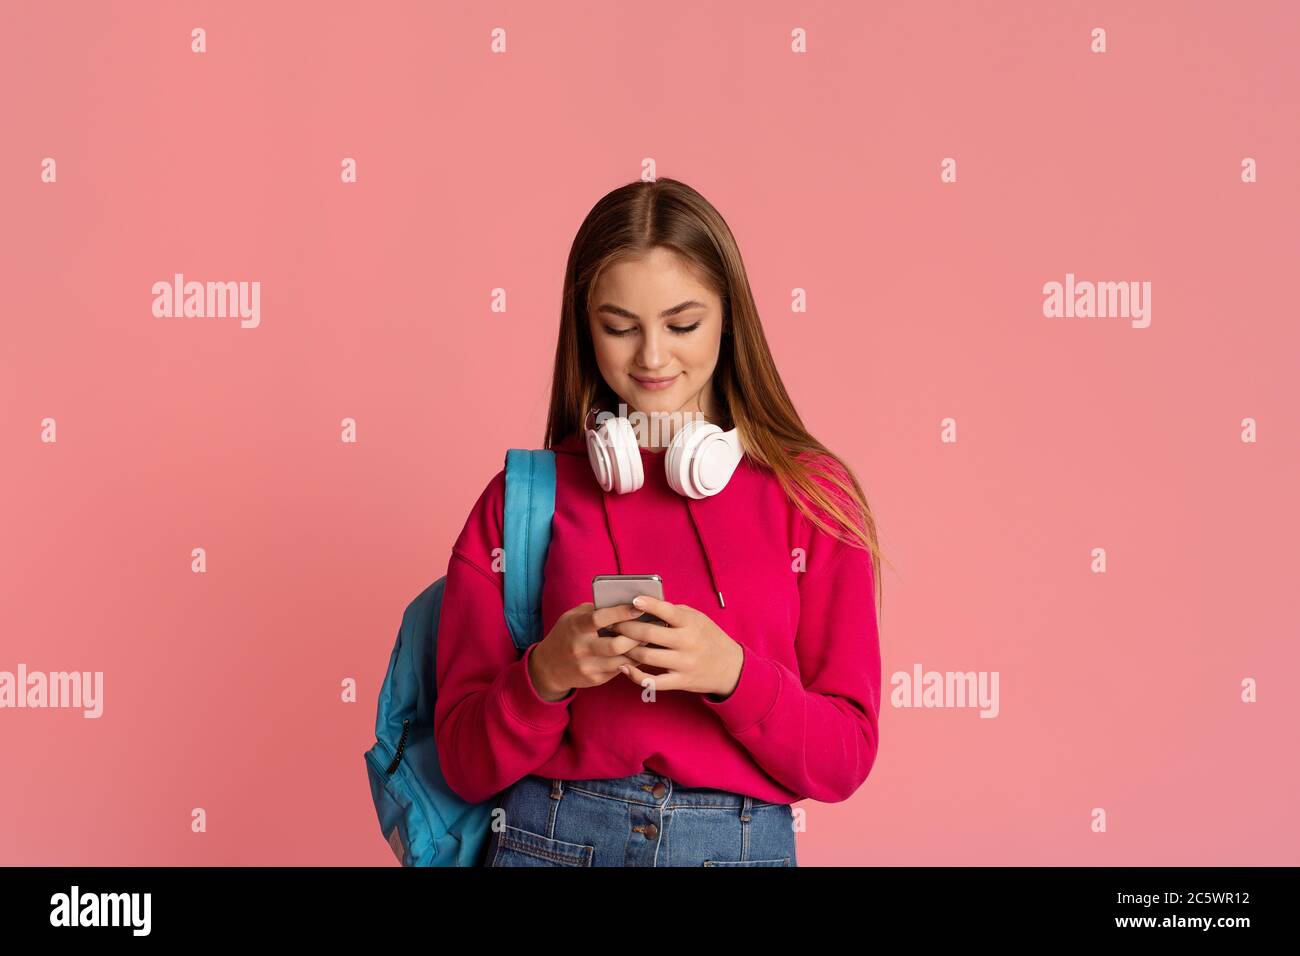 Modern teenagers. Smiling girl with headphones and backpack tapping on smartphone Stock Photo